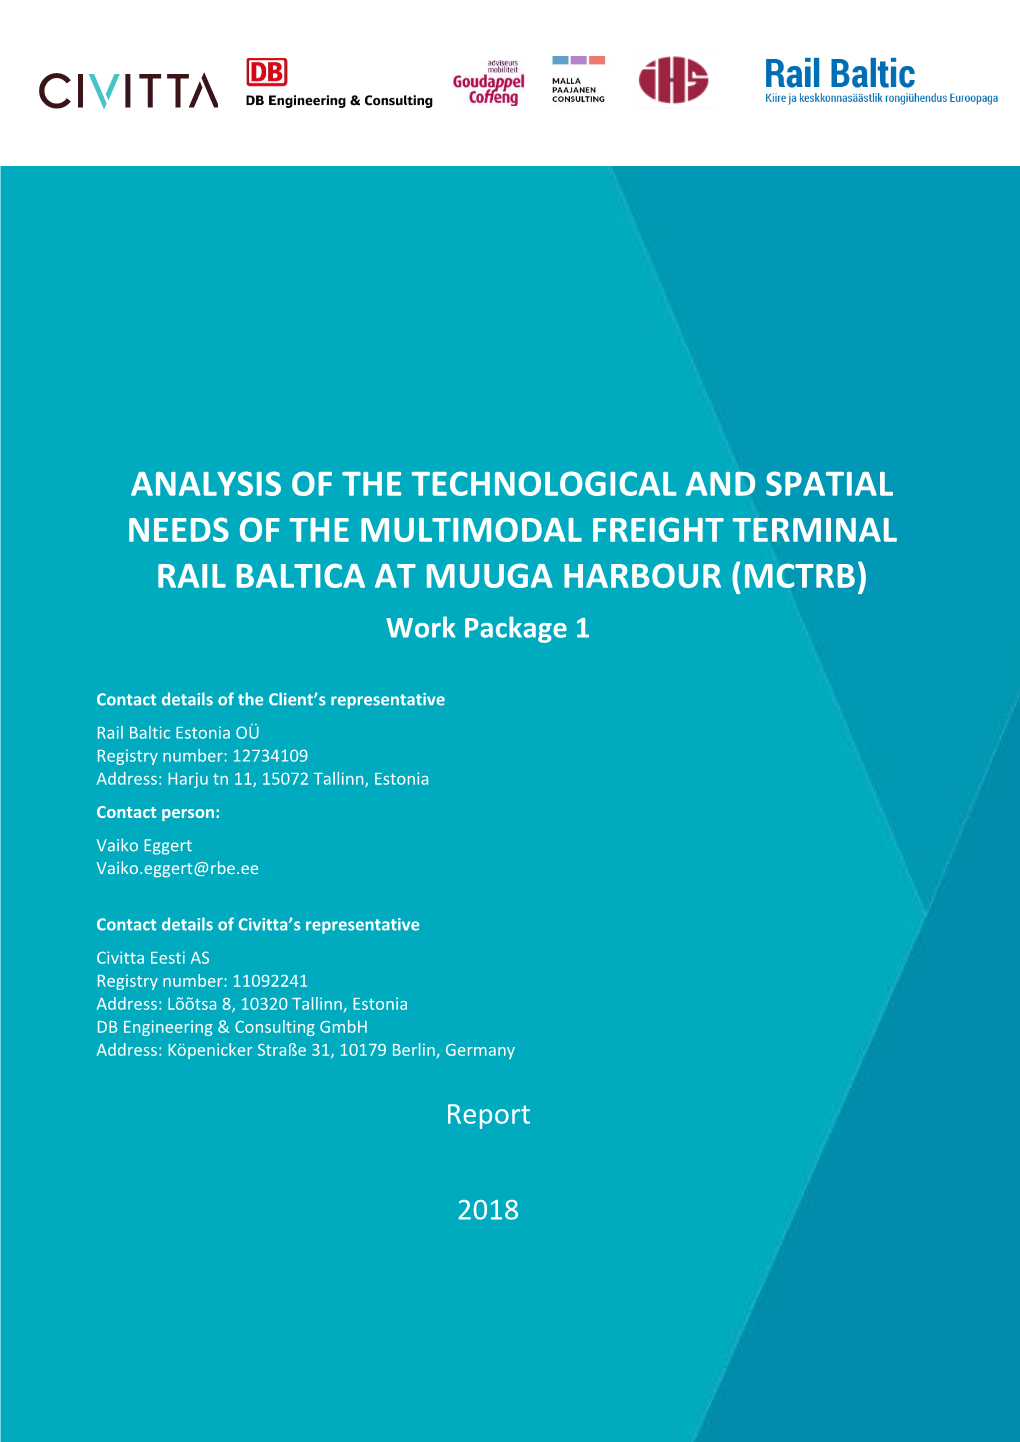 ANALYSIS of the TECHNOLOGICAL and SPATIAL NEEDS of the MULTIMODAL FREIGHT TERMINAL RAIL BALTICA at MUUGA HARBOUR (MCTRB) Work Package 1